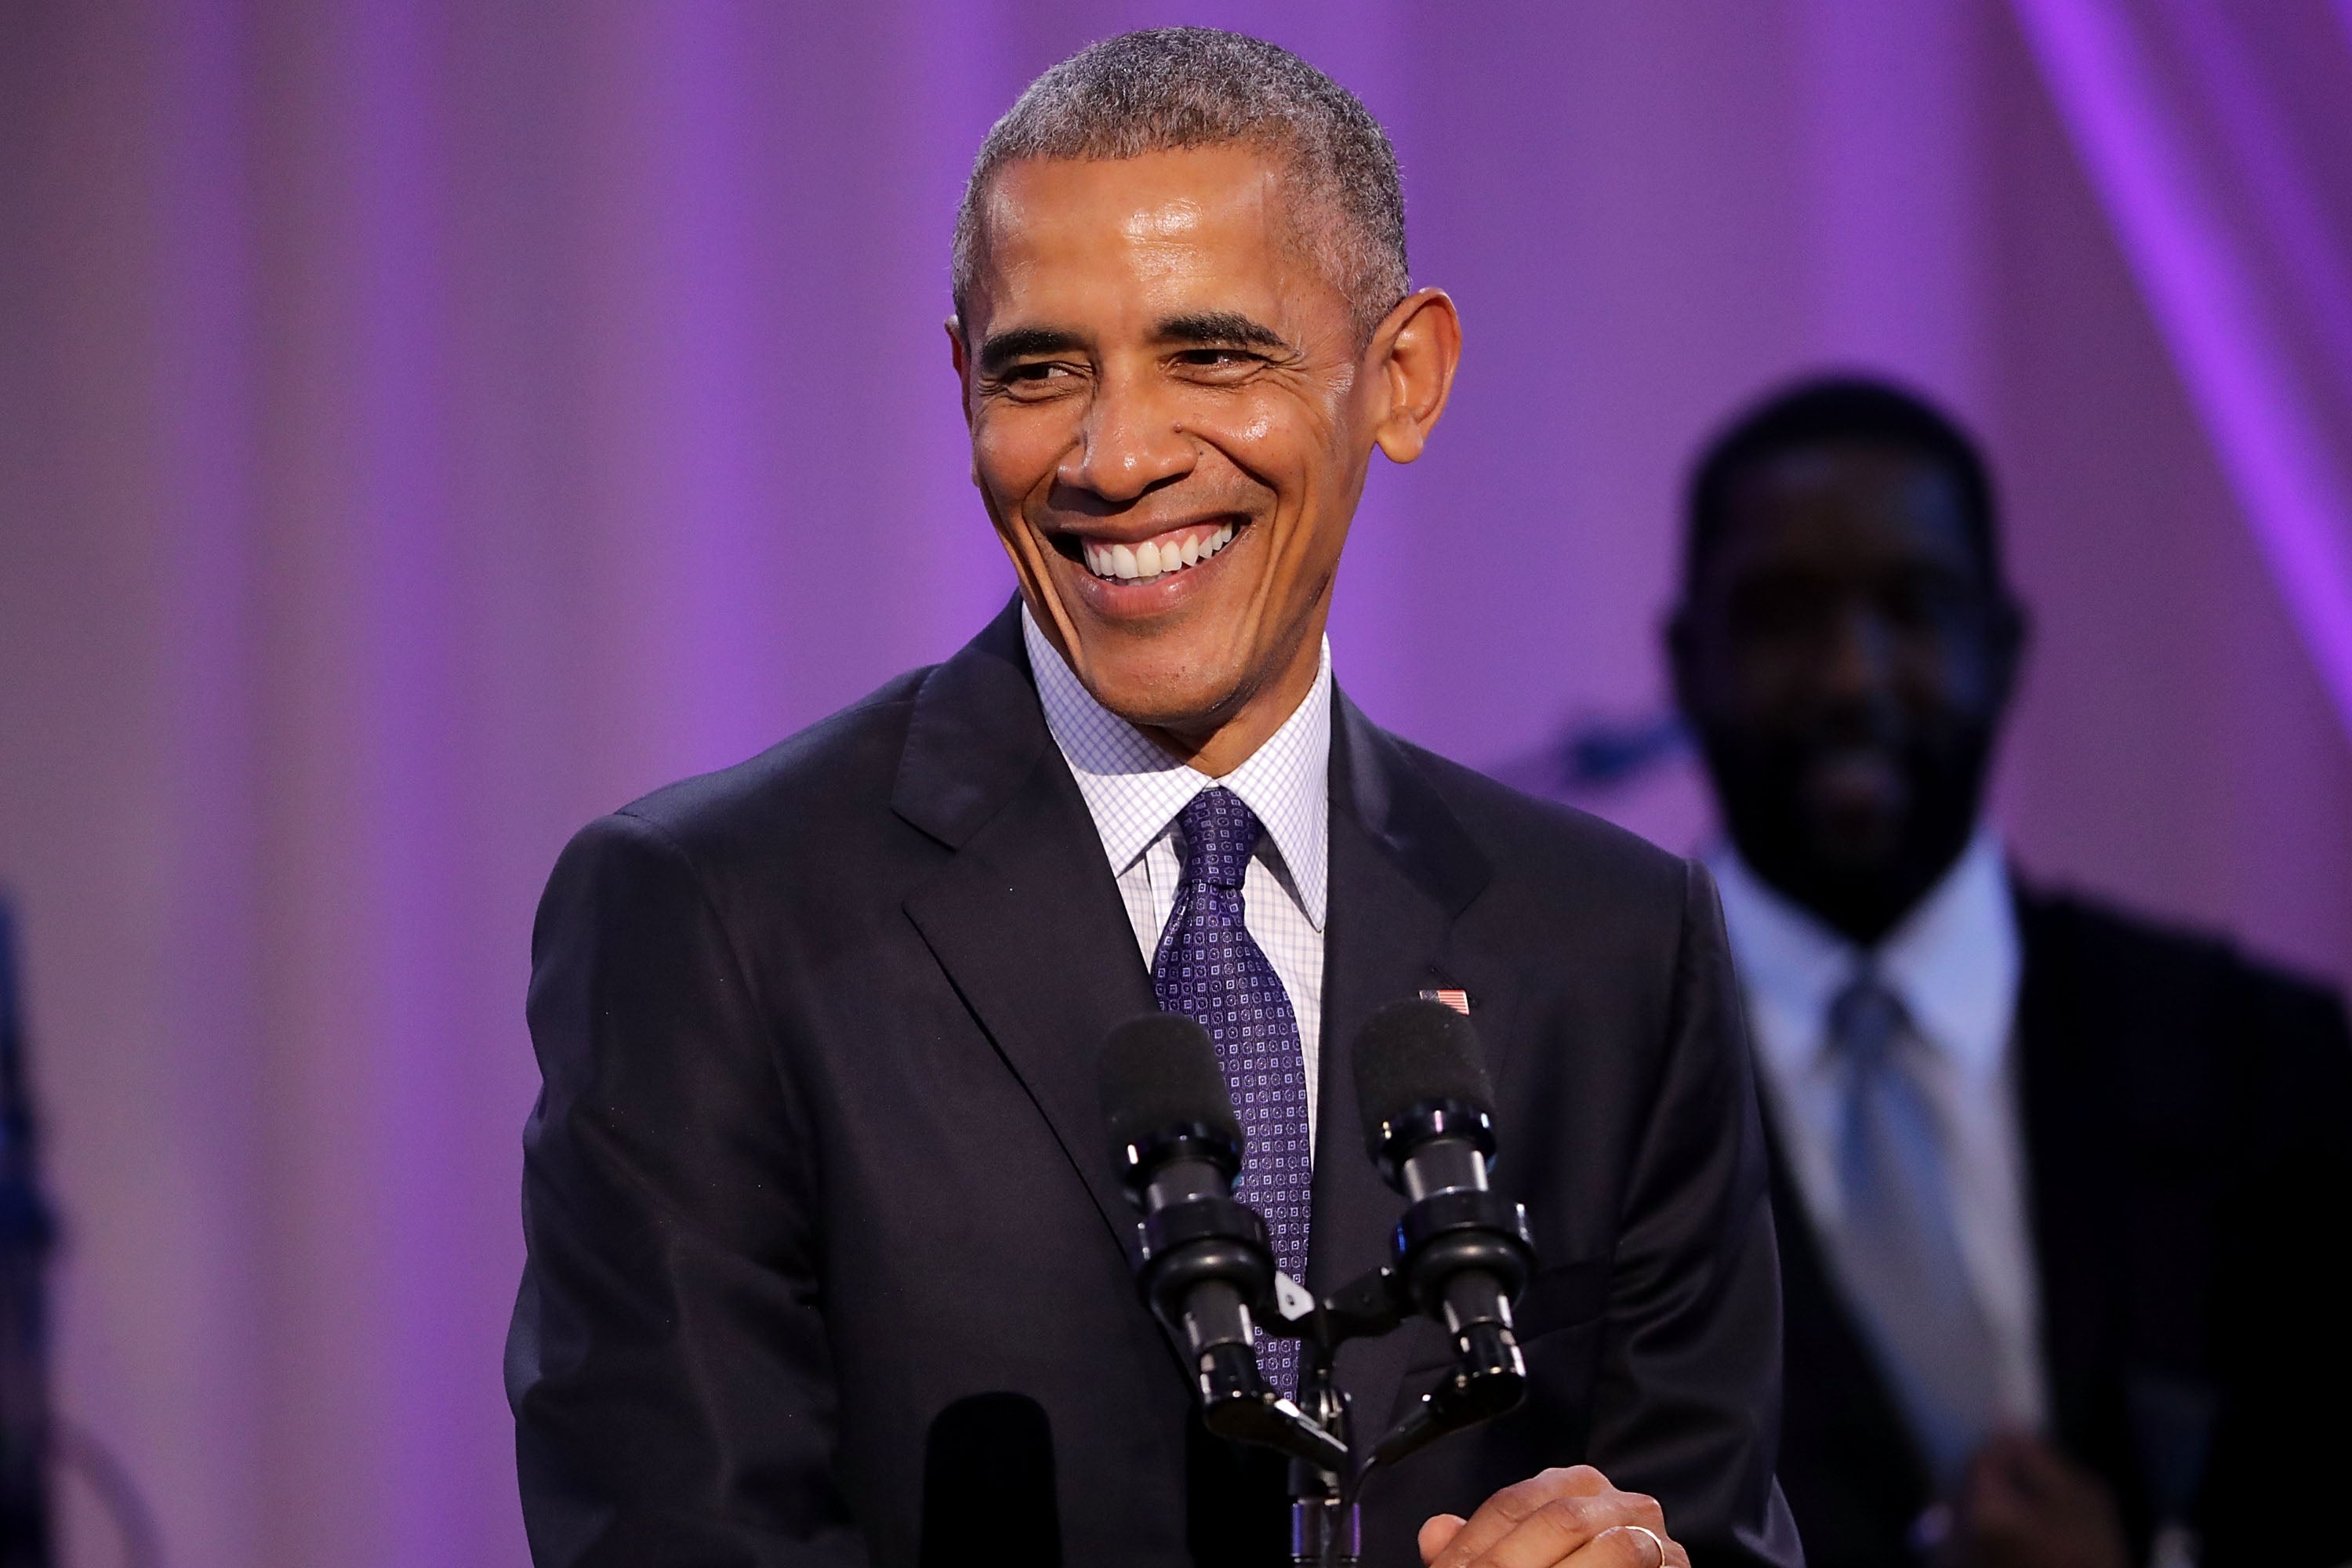 President Obama: “If I Watched Fox News, I probably wouldn’t vote for me either”